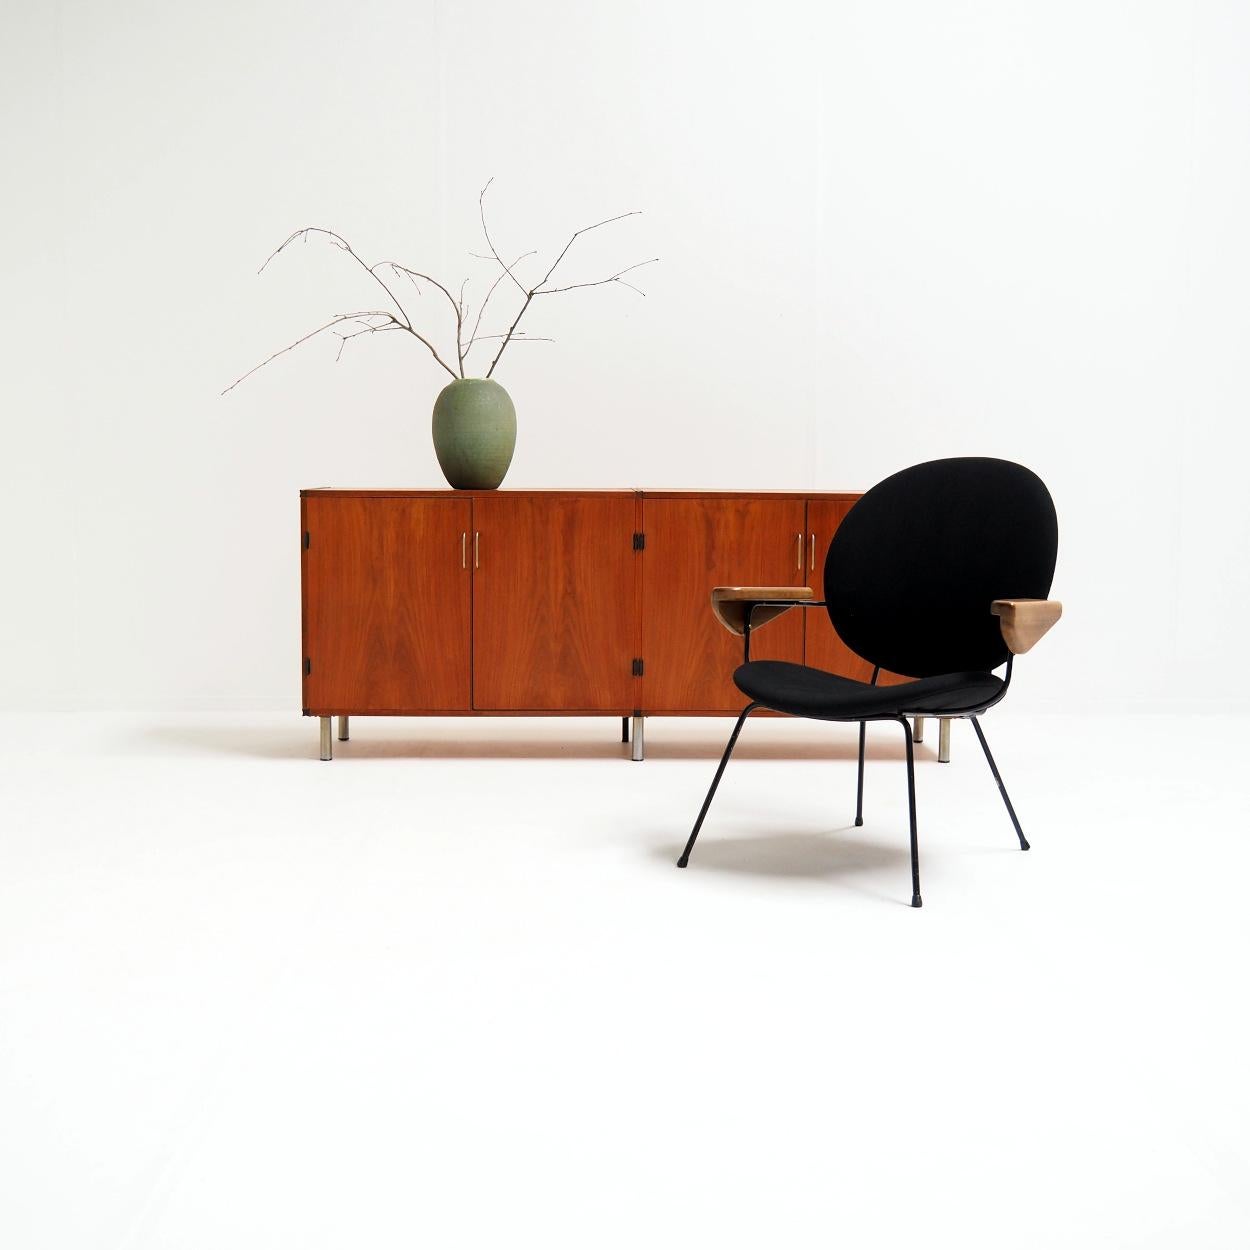 Sideboard by Cees Braakman for Pastoe. It’s the ‘Made to Measure’ series that was produced from the early 1950s till the mid 1960s.

The sideboard is in very good condition with an absolute minimum of wear, with some professional restorations on